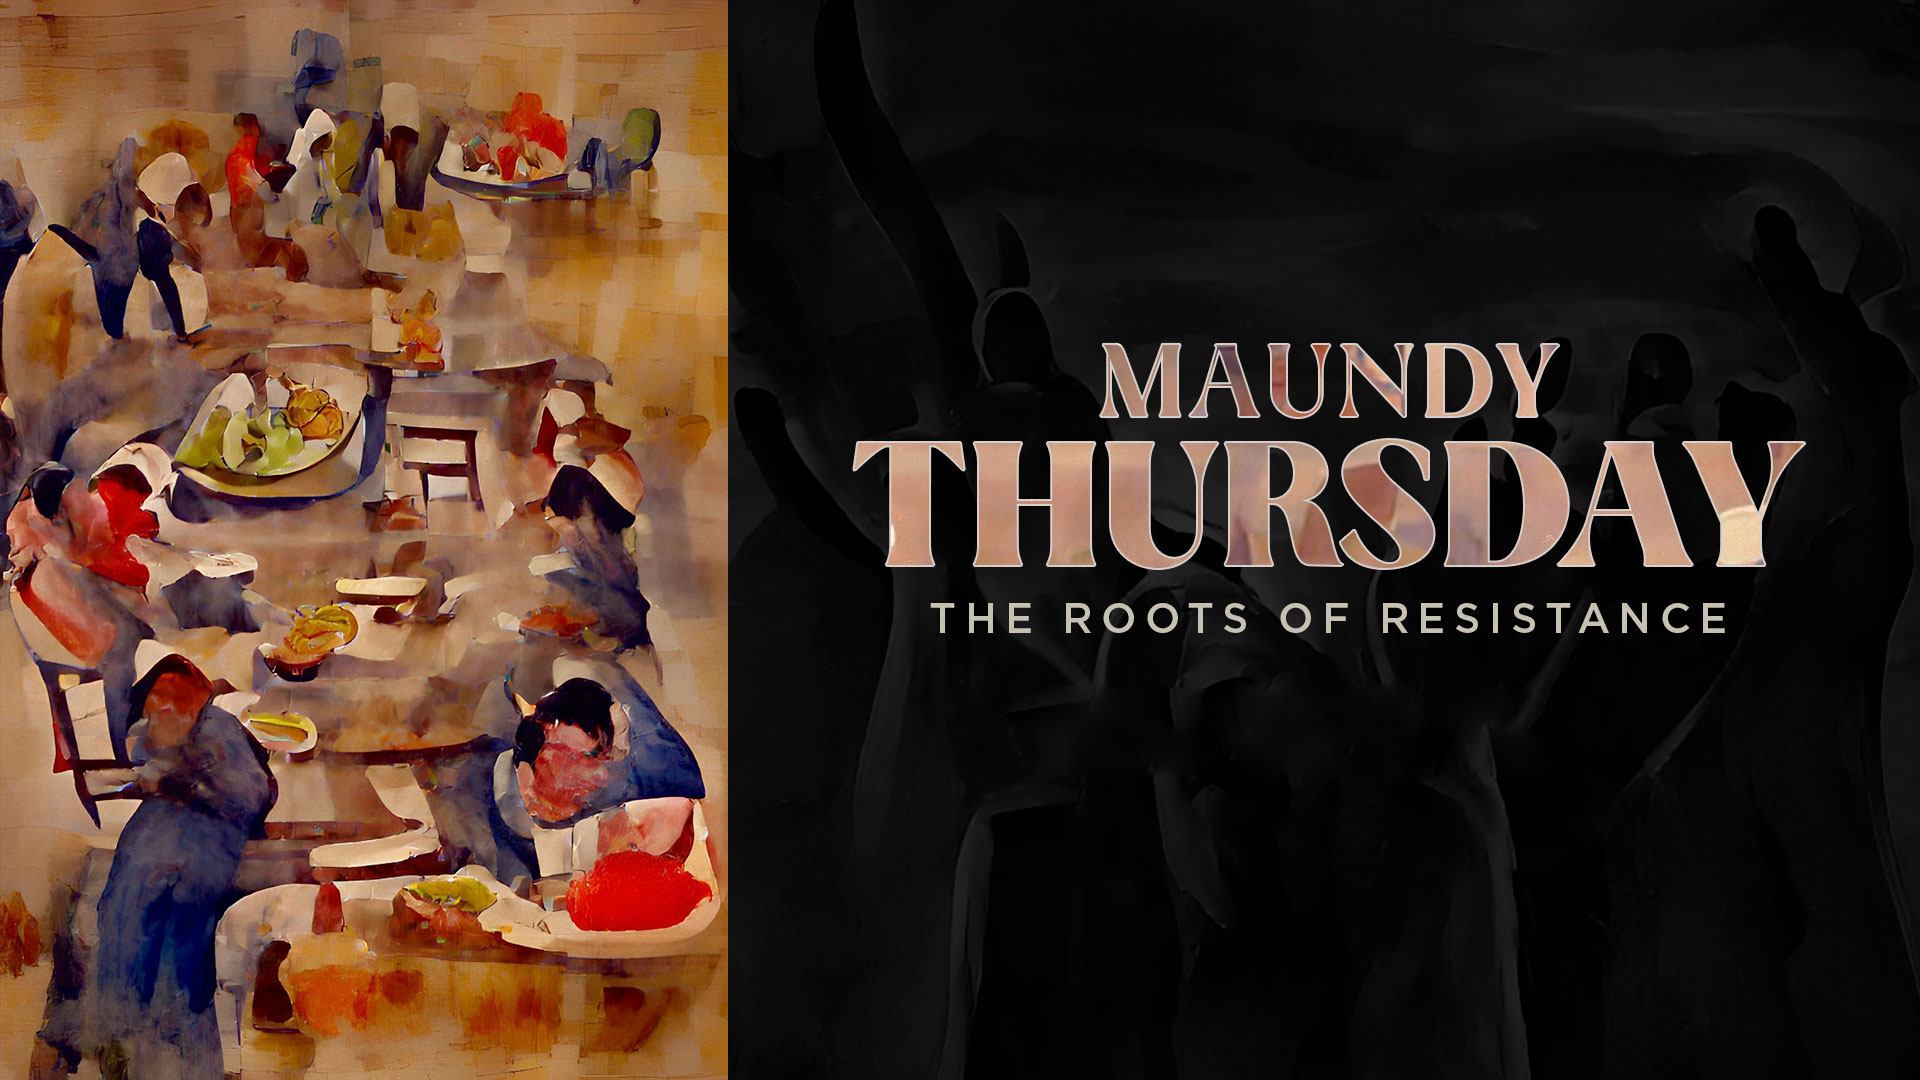 Maundy Thursday: A Perplexing Posture